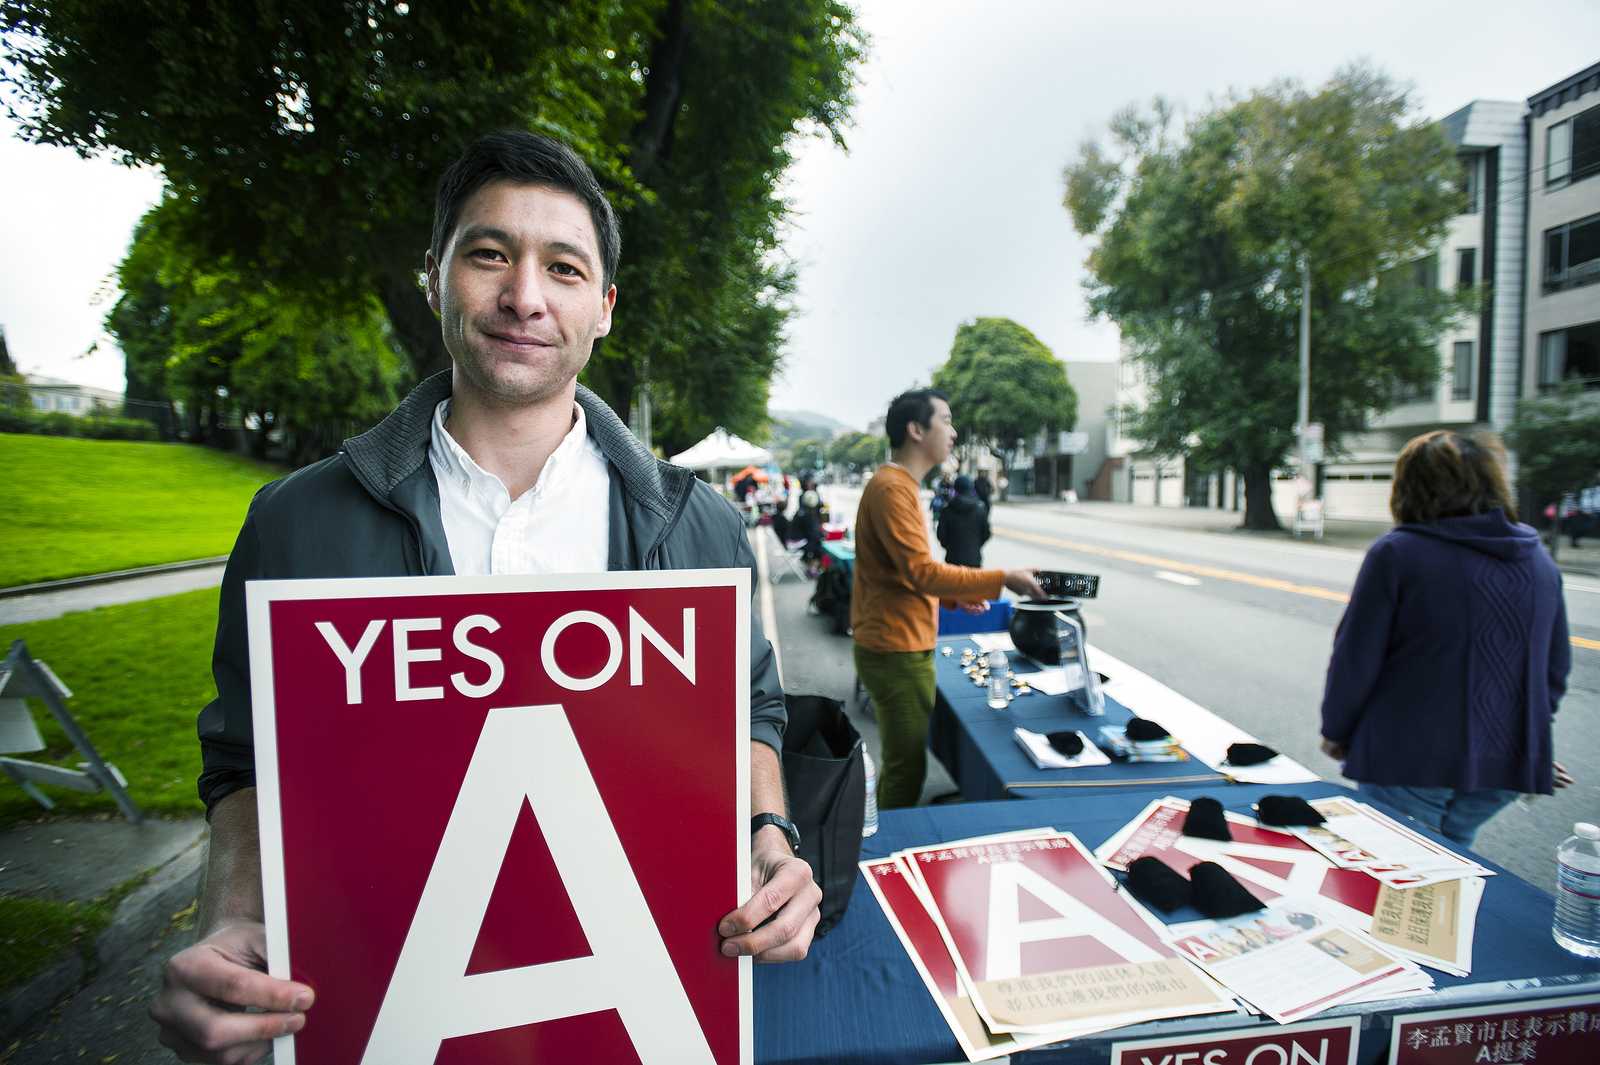 Nicholas Lucas campaigns for prop A protecting San Francisco retirees during a Sunday Street event on Arguello boulevard on Sunday, Oct. 27, 2013. Photo by Benjamin Kamps / Xpress